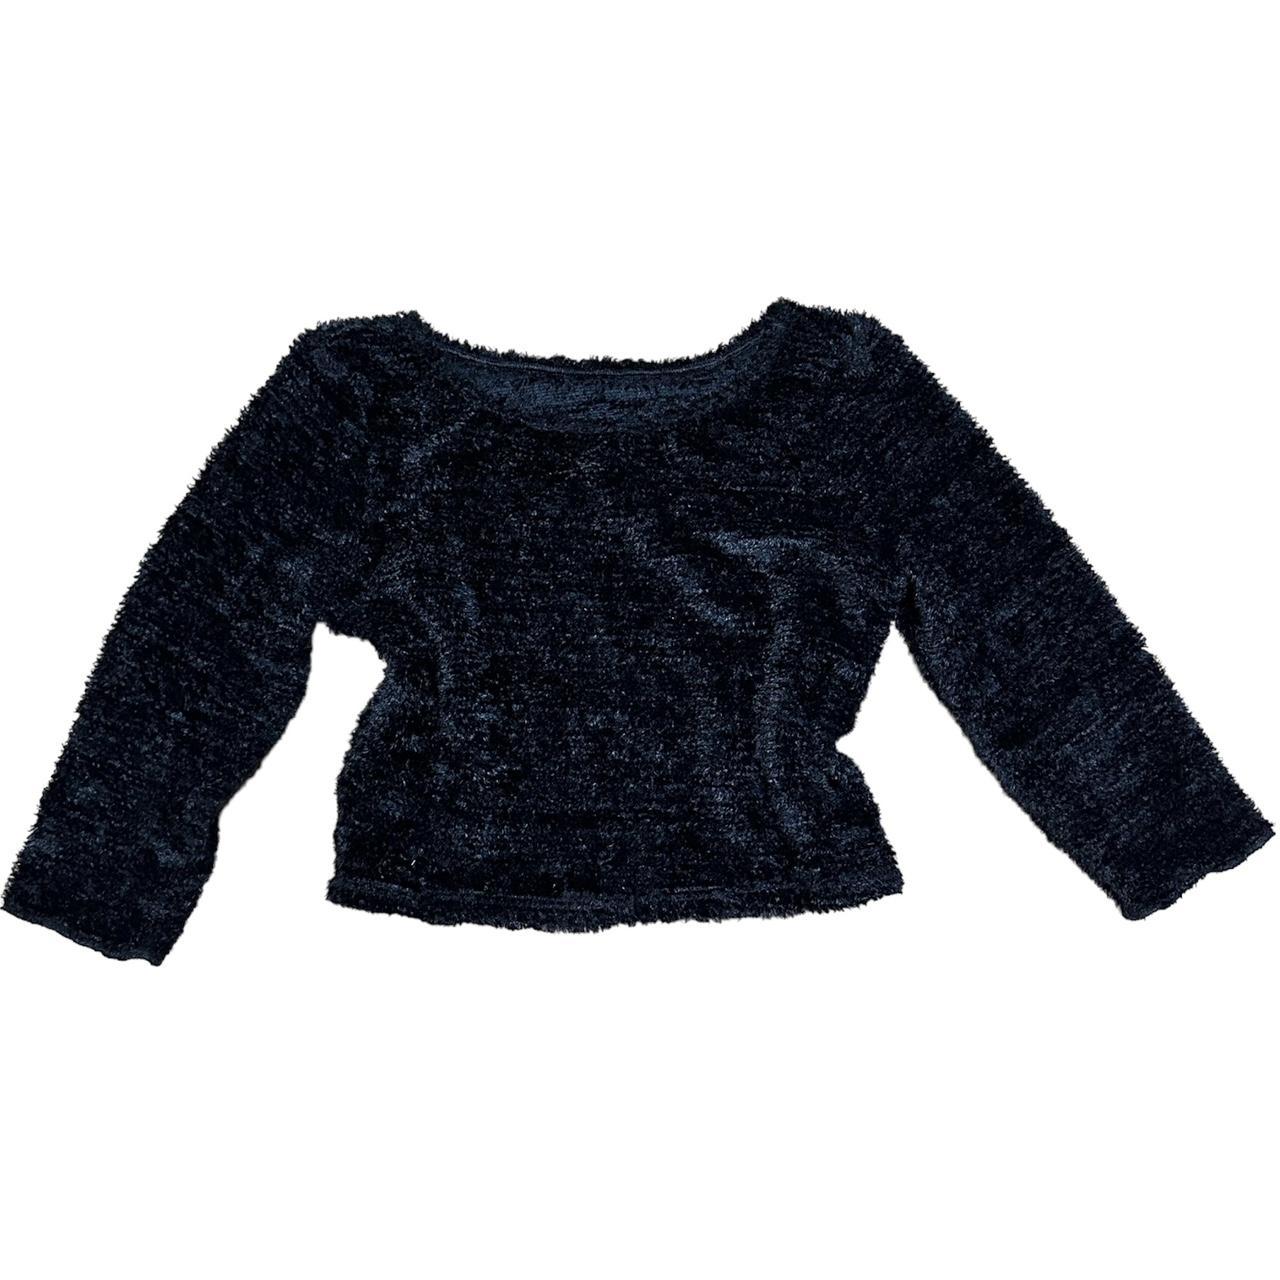 Black Fuzzy Crop Sweater Top 🖤 Fits size small... - Depop